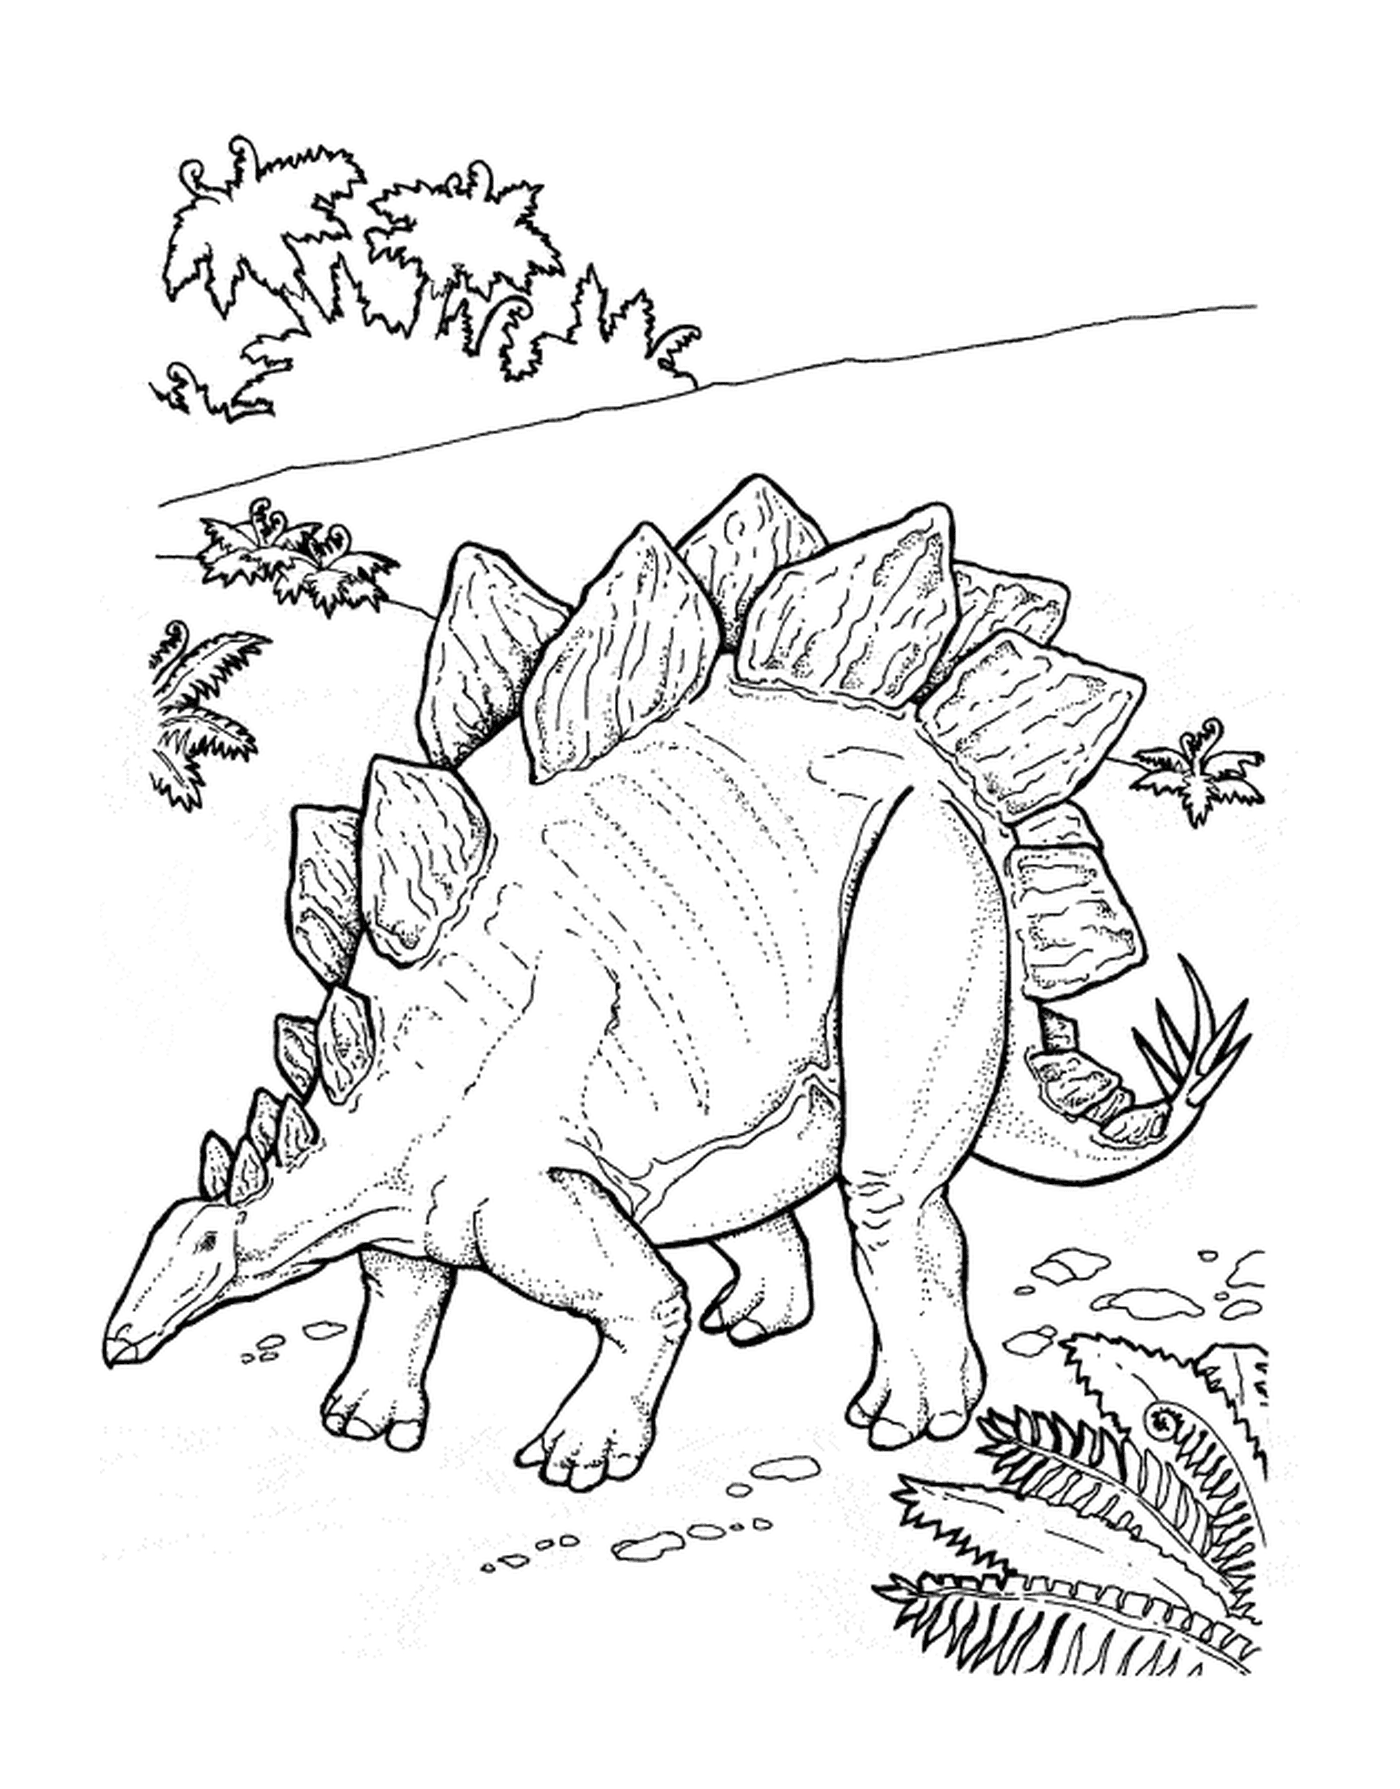  Adult stagosaur standing in a green meadow 